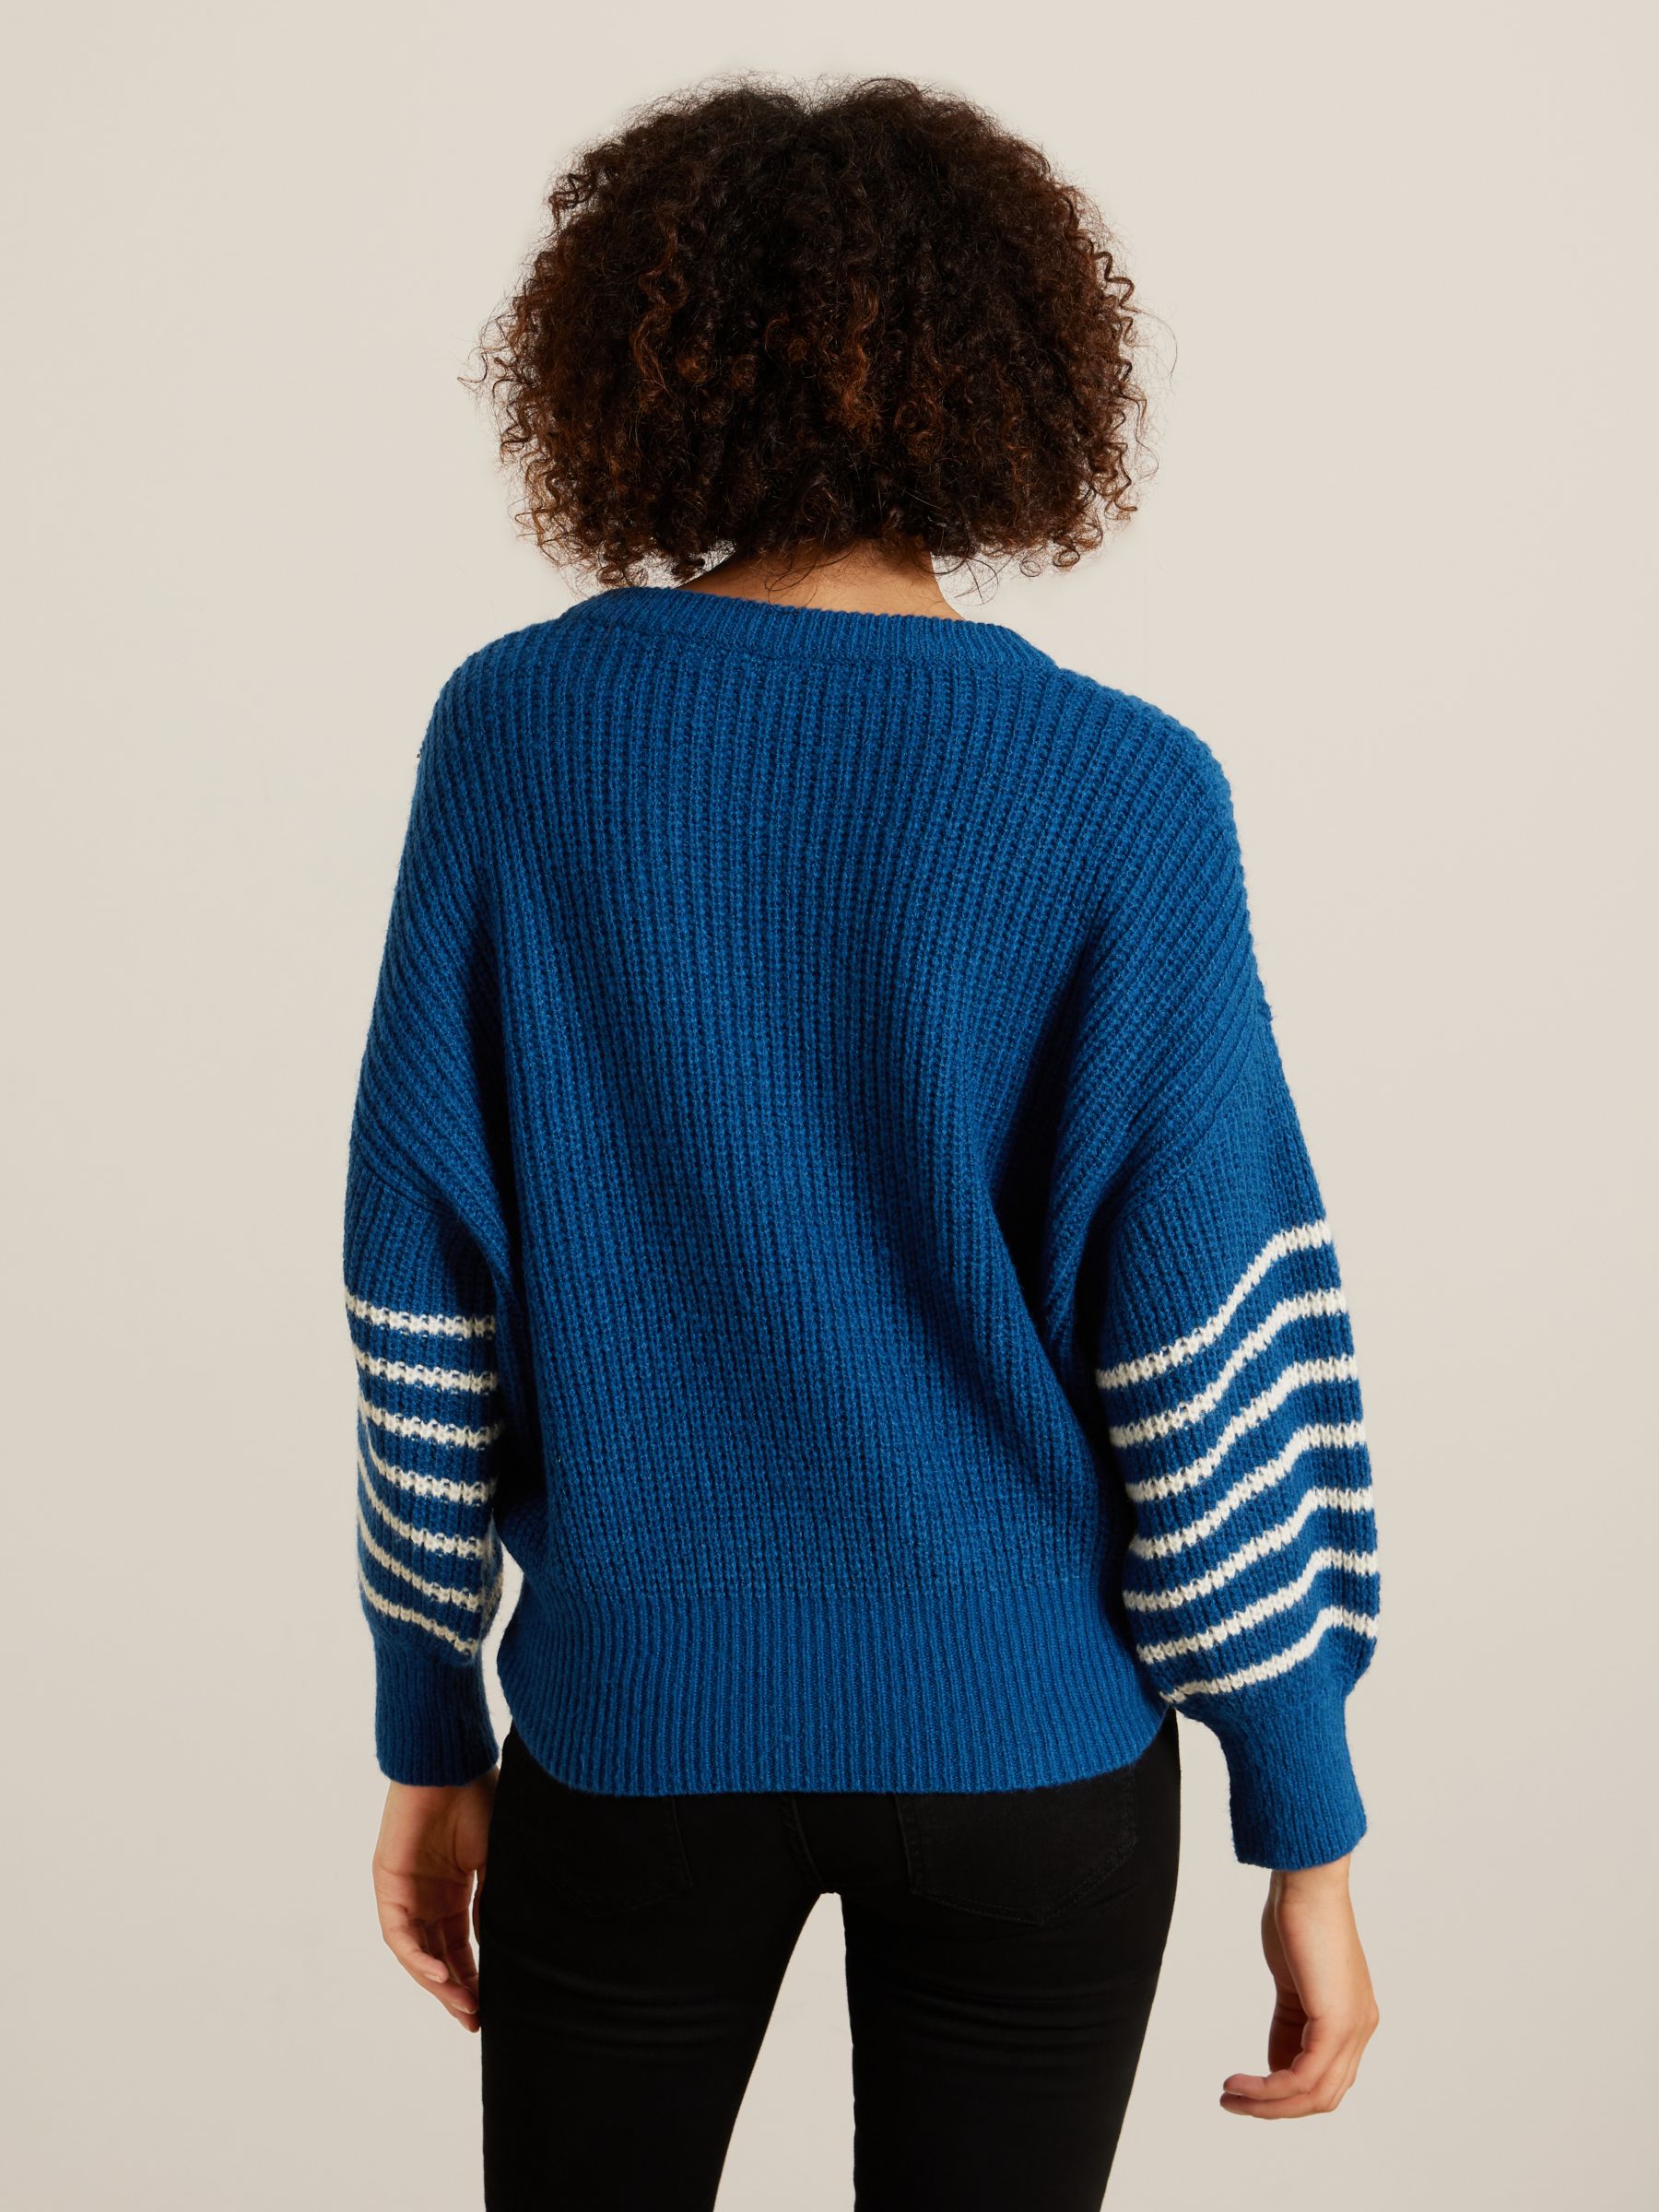 AND/OR Lea Stripe Knit Jumper